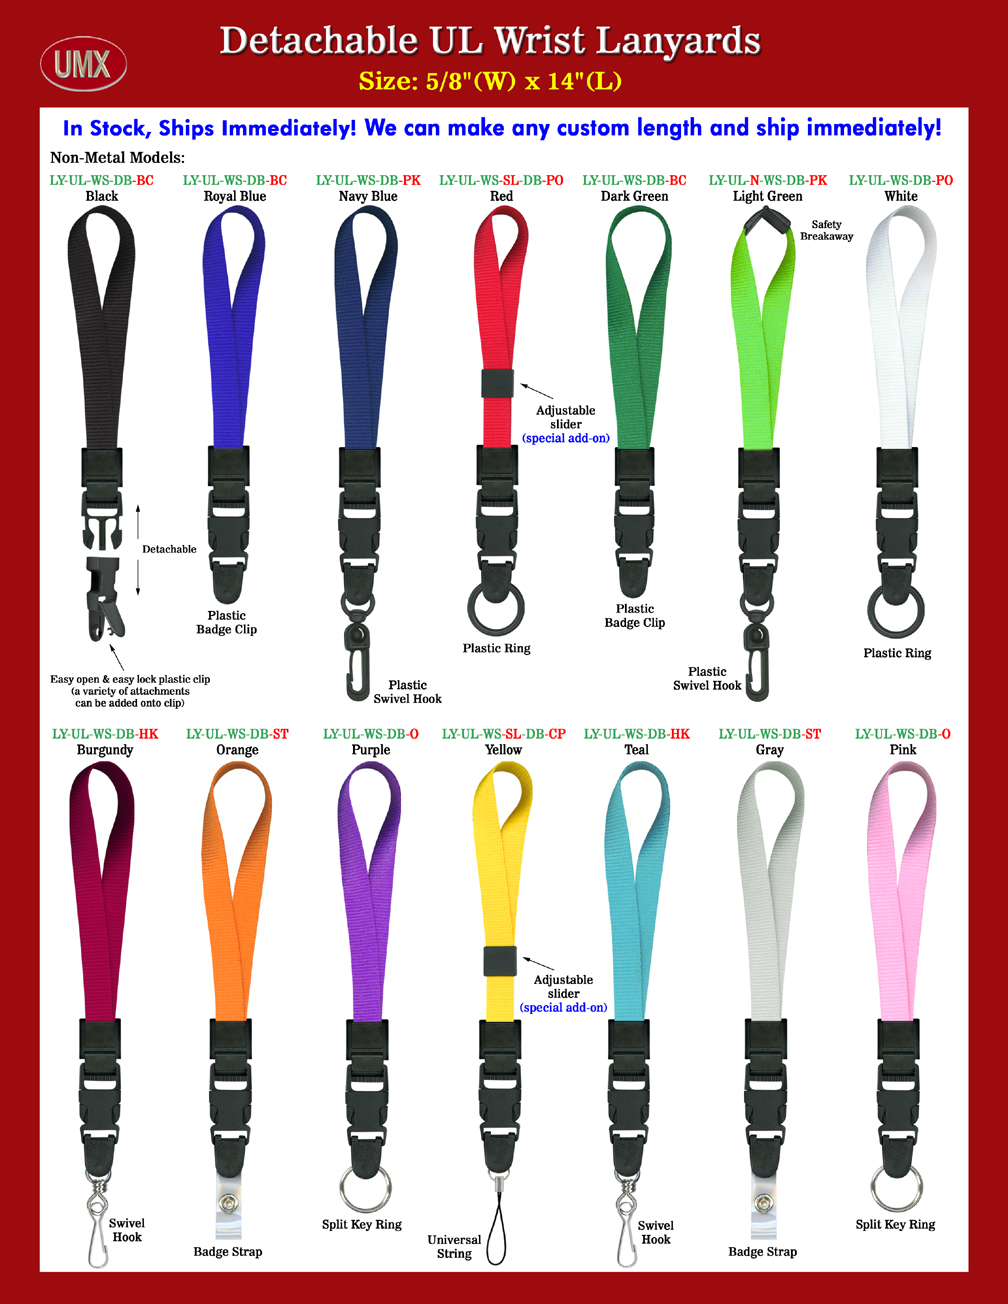 5/8" Heavy Duty Quick Release Plain Color Universal Link Wrist Lanyards - Detachable Wrist Lanyards With 13-Colors In Stock.